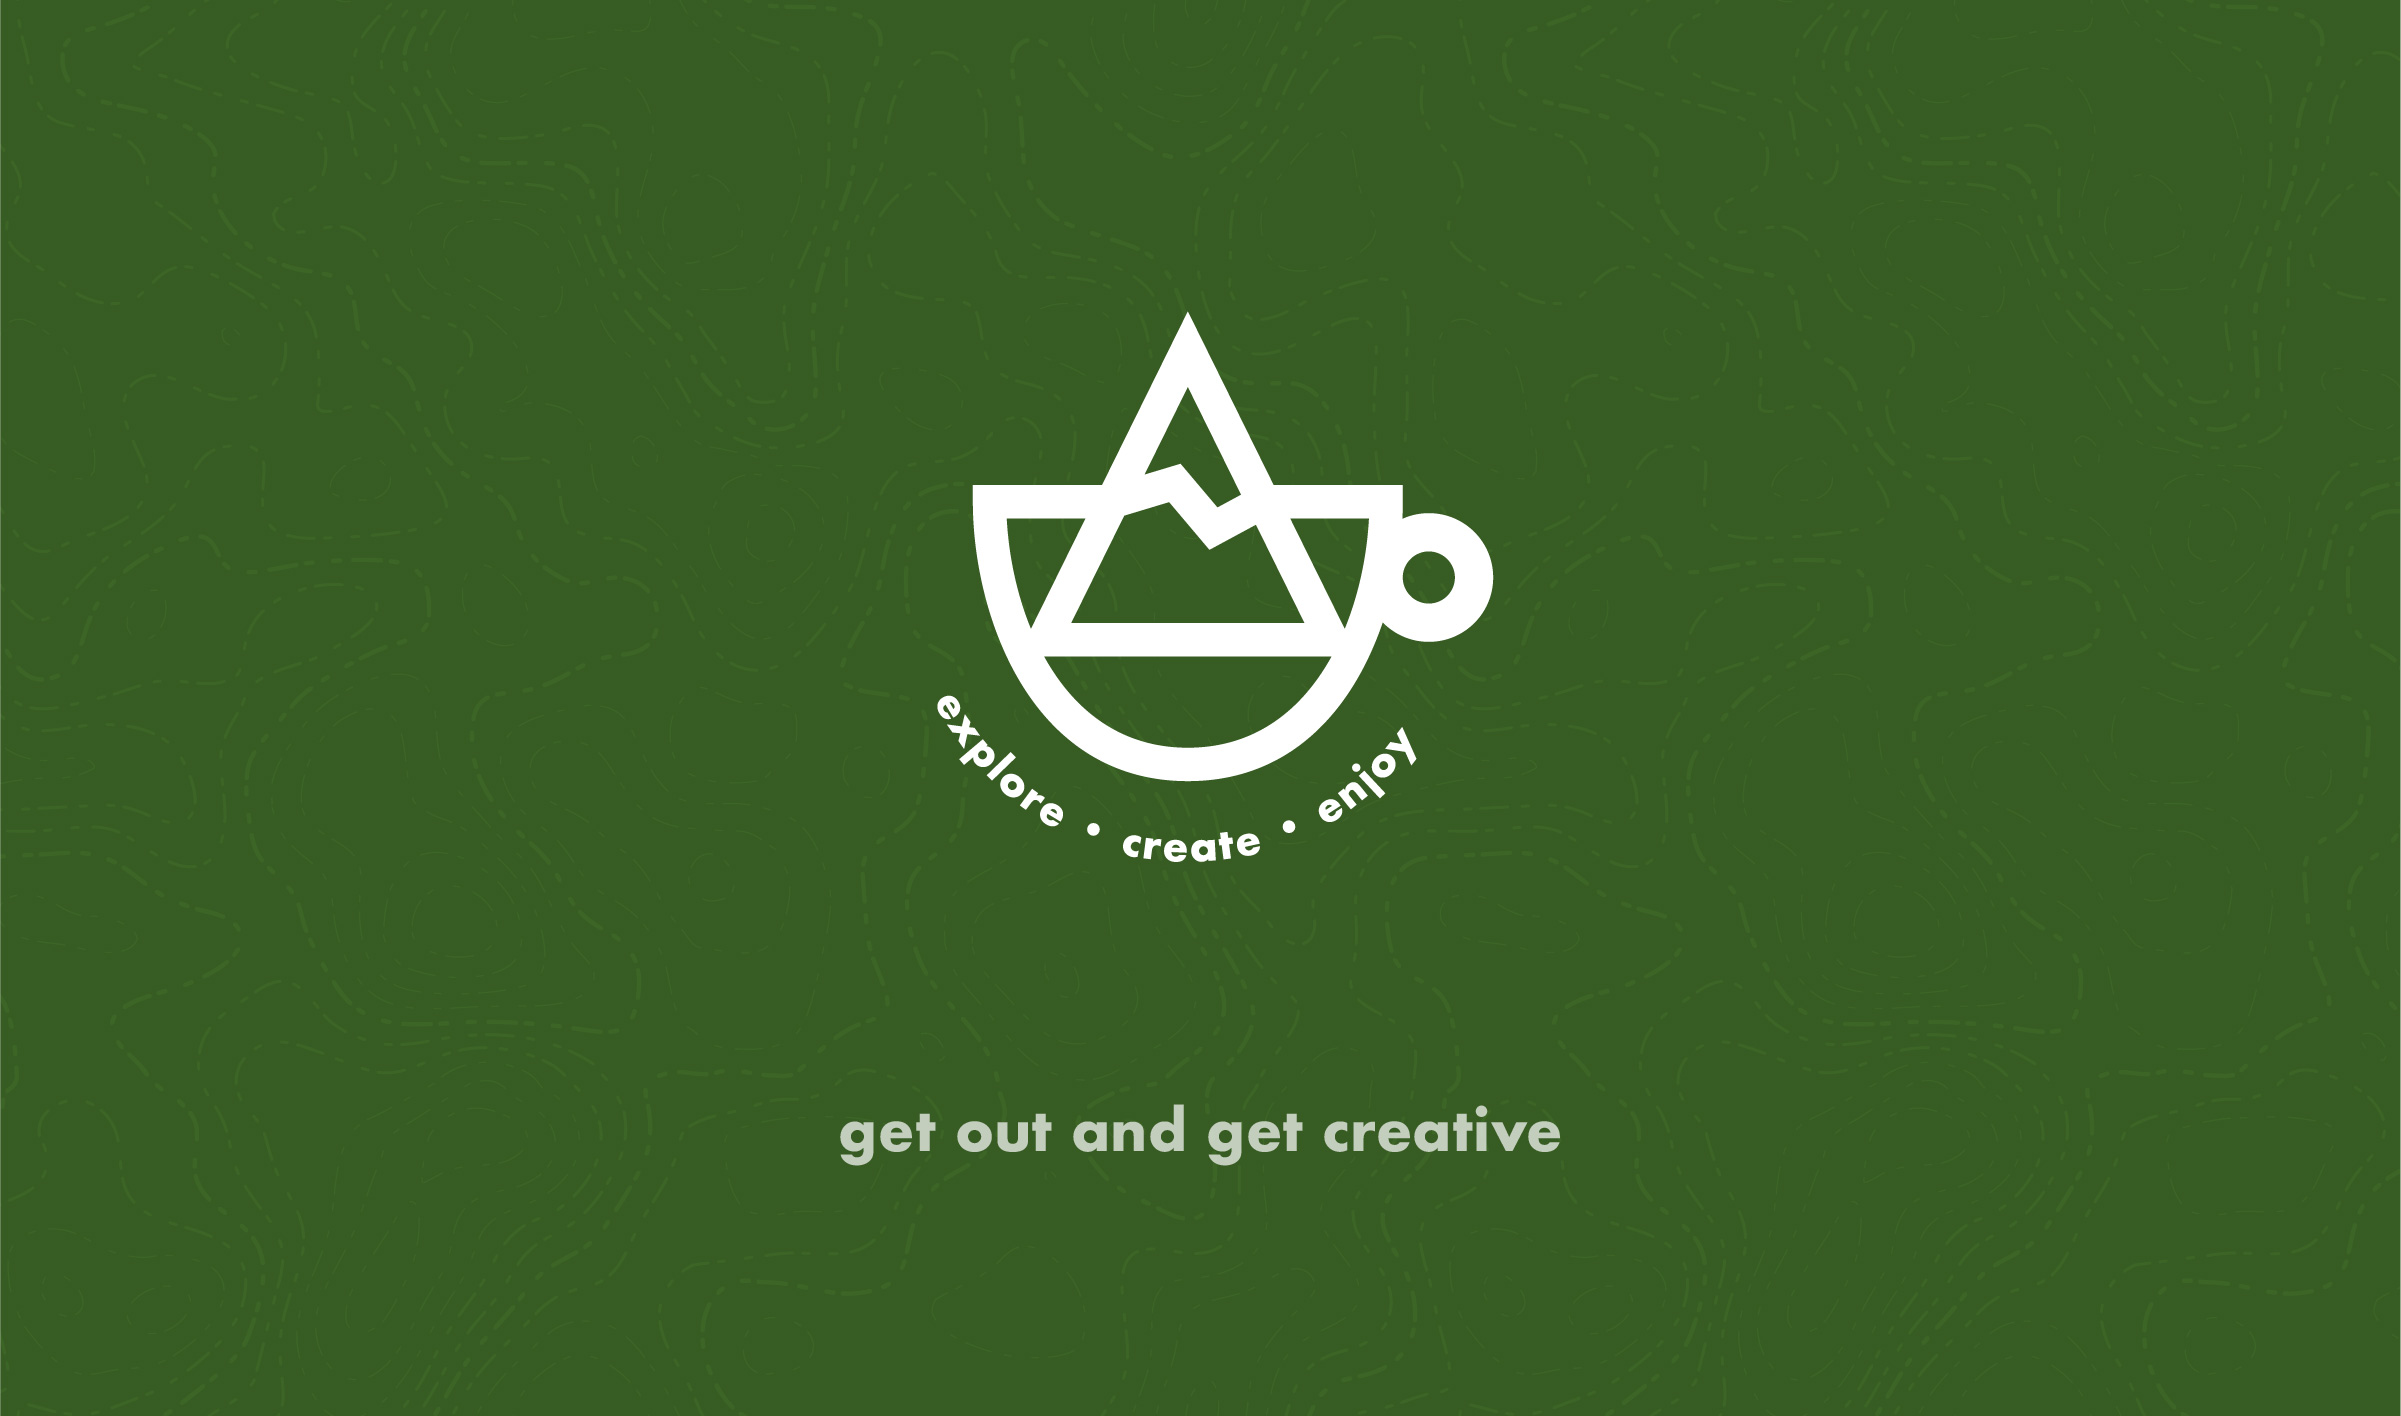 Explore Create Enjoy logo: get out and get creative